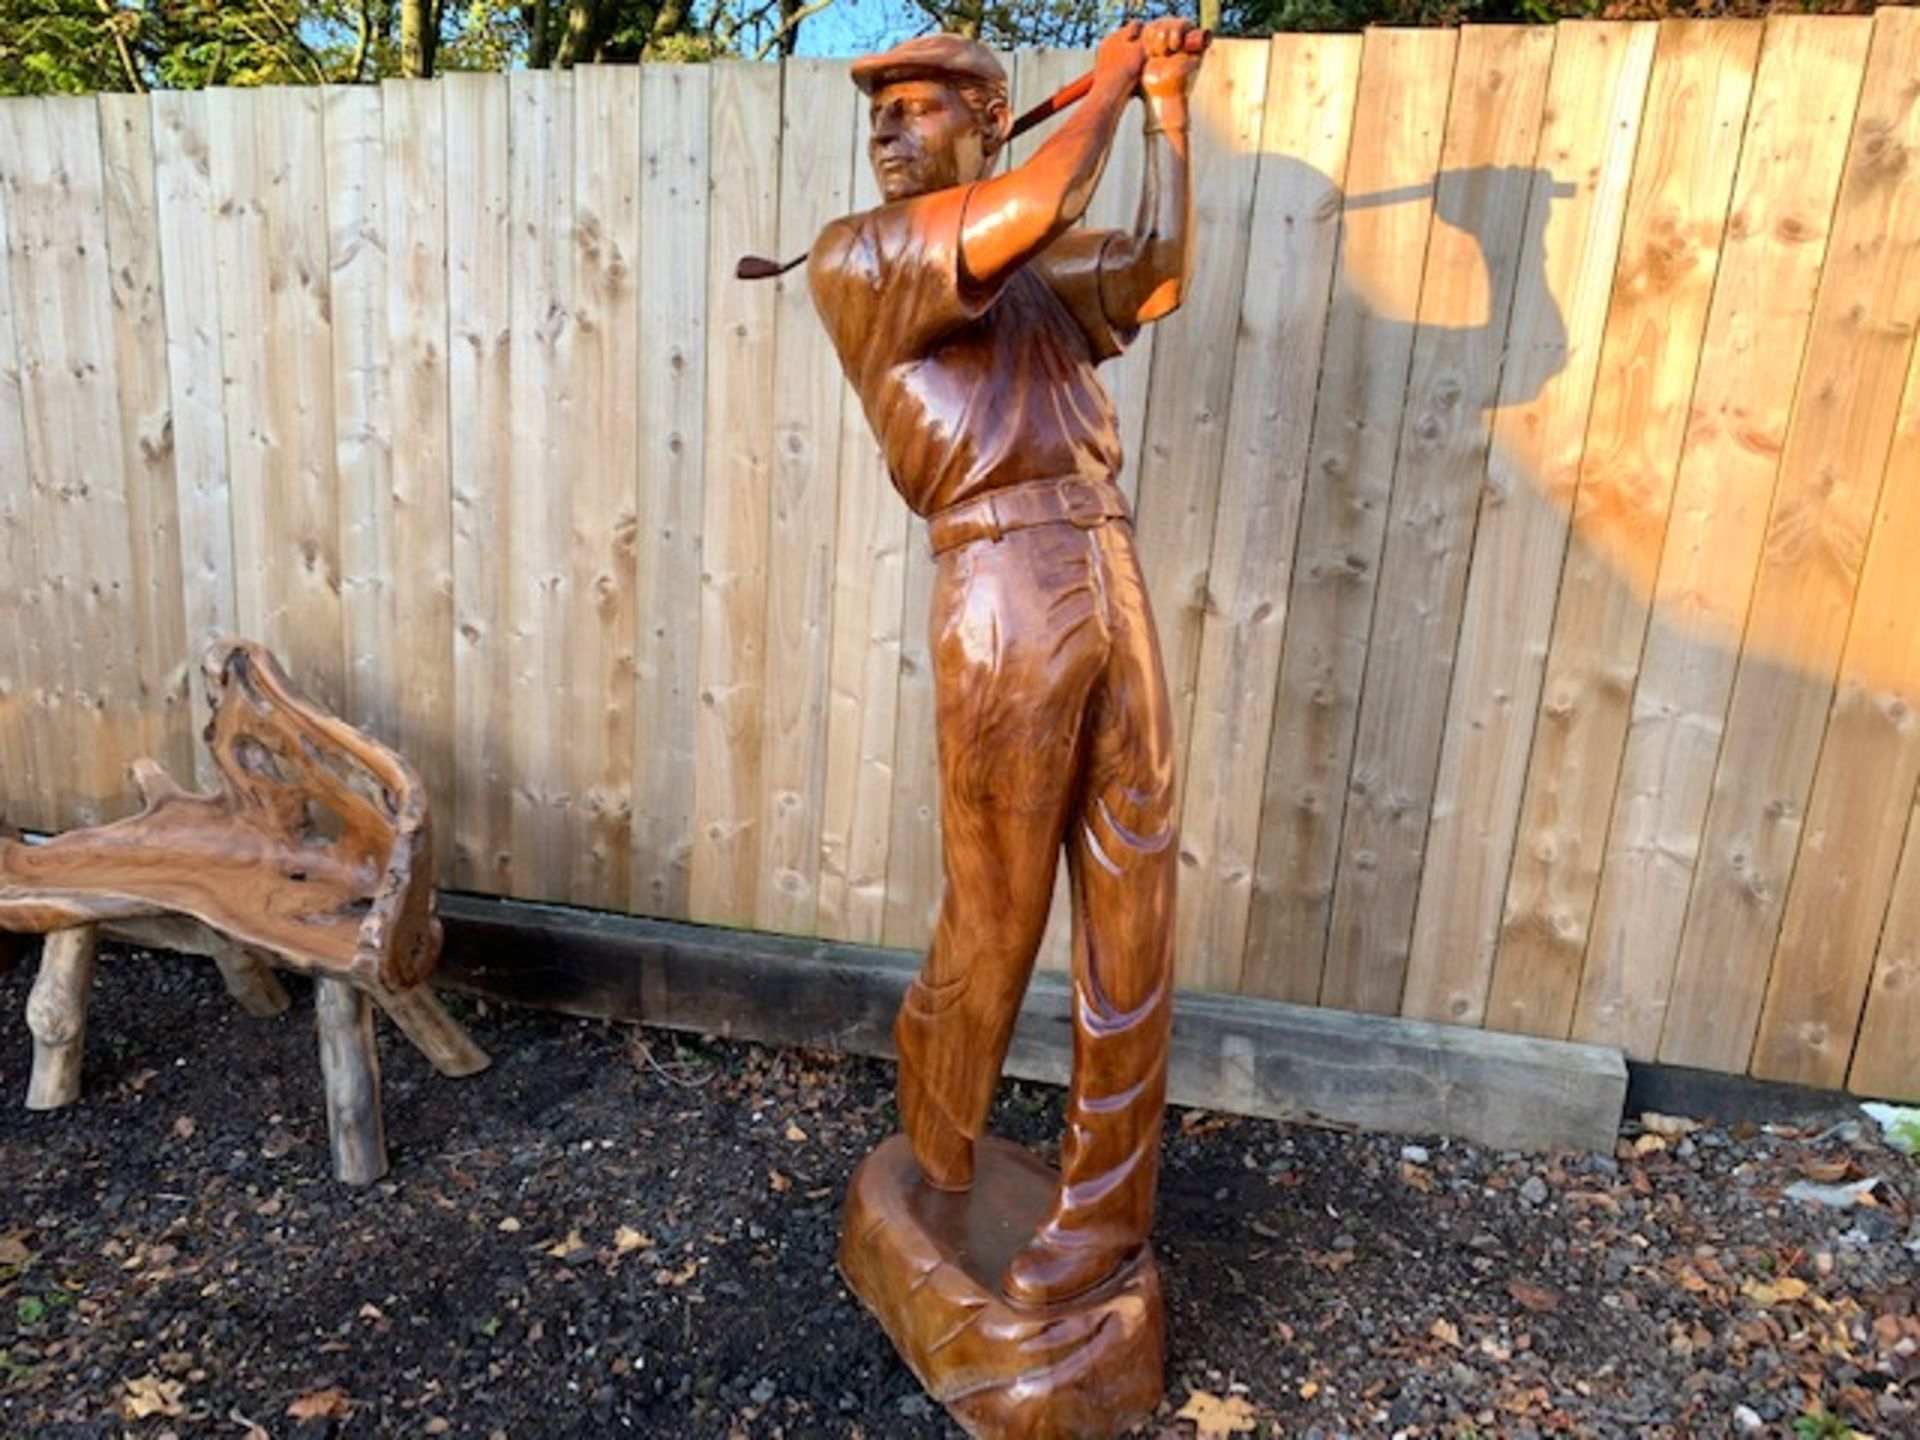 MUSEUM QUALITY HANDCARVED STRIKING 2M HIGH SOLID WOOD GOLFER IN MOTION